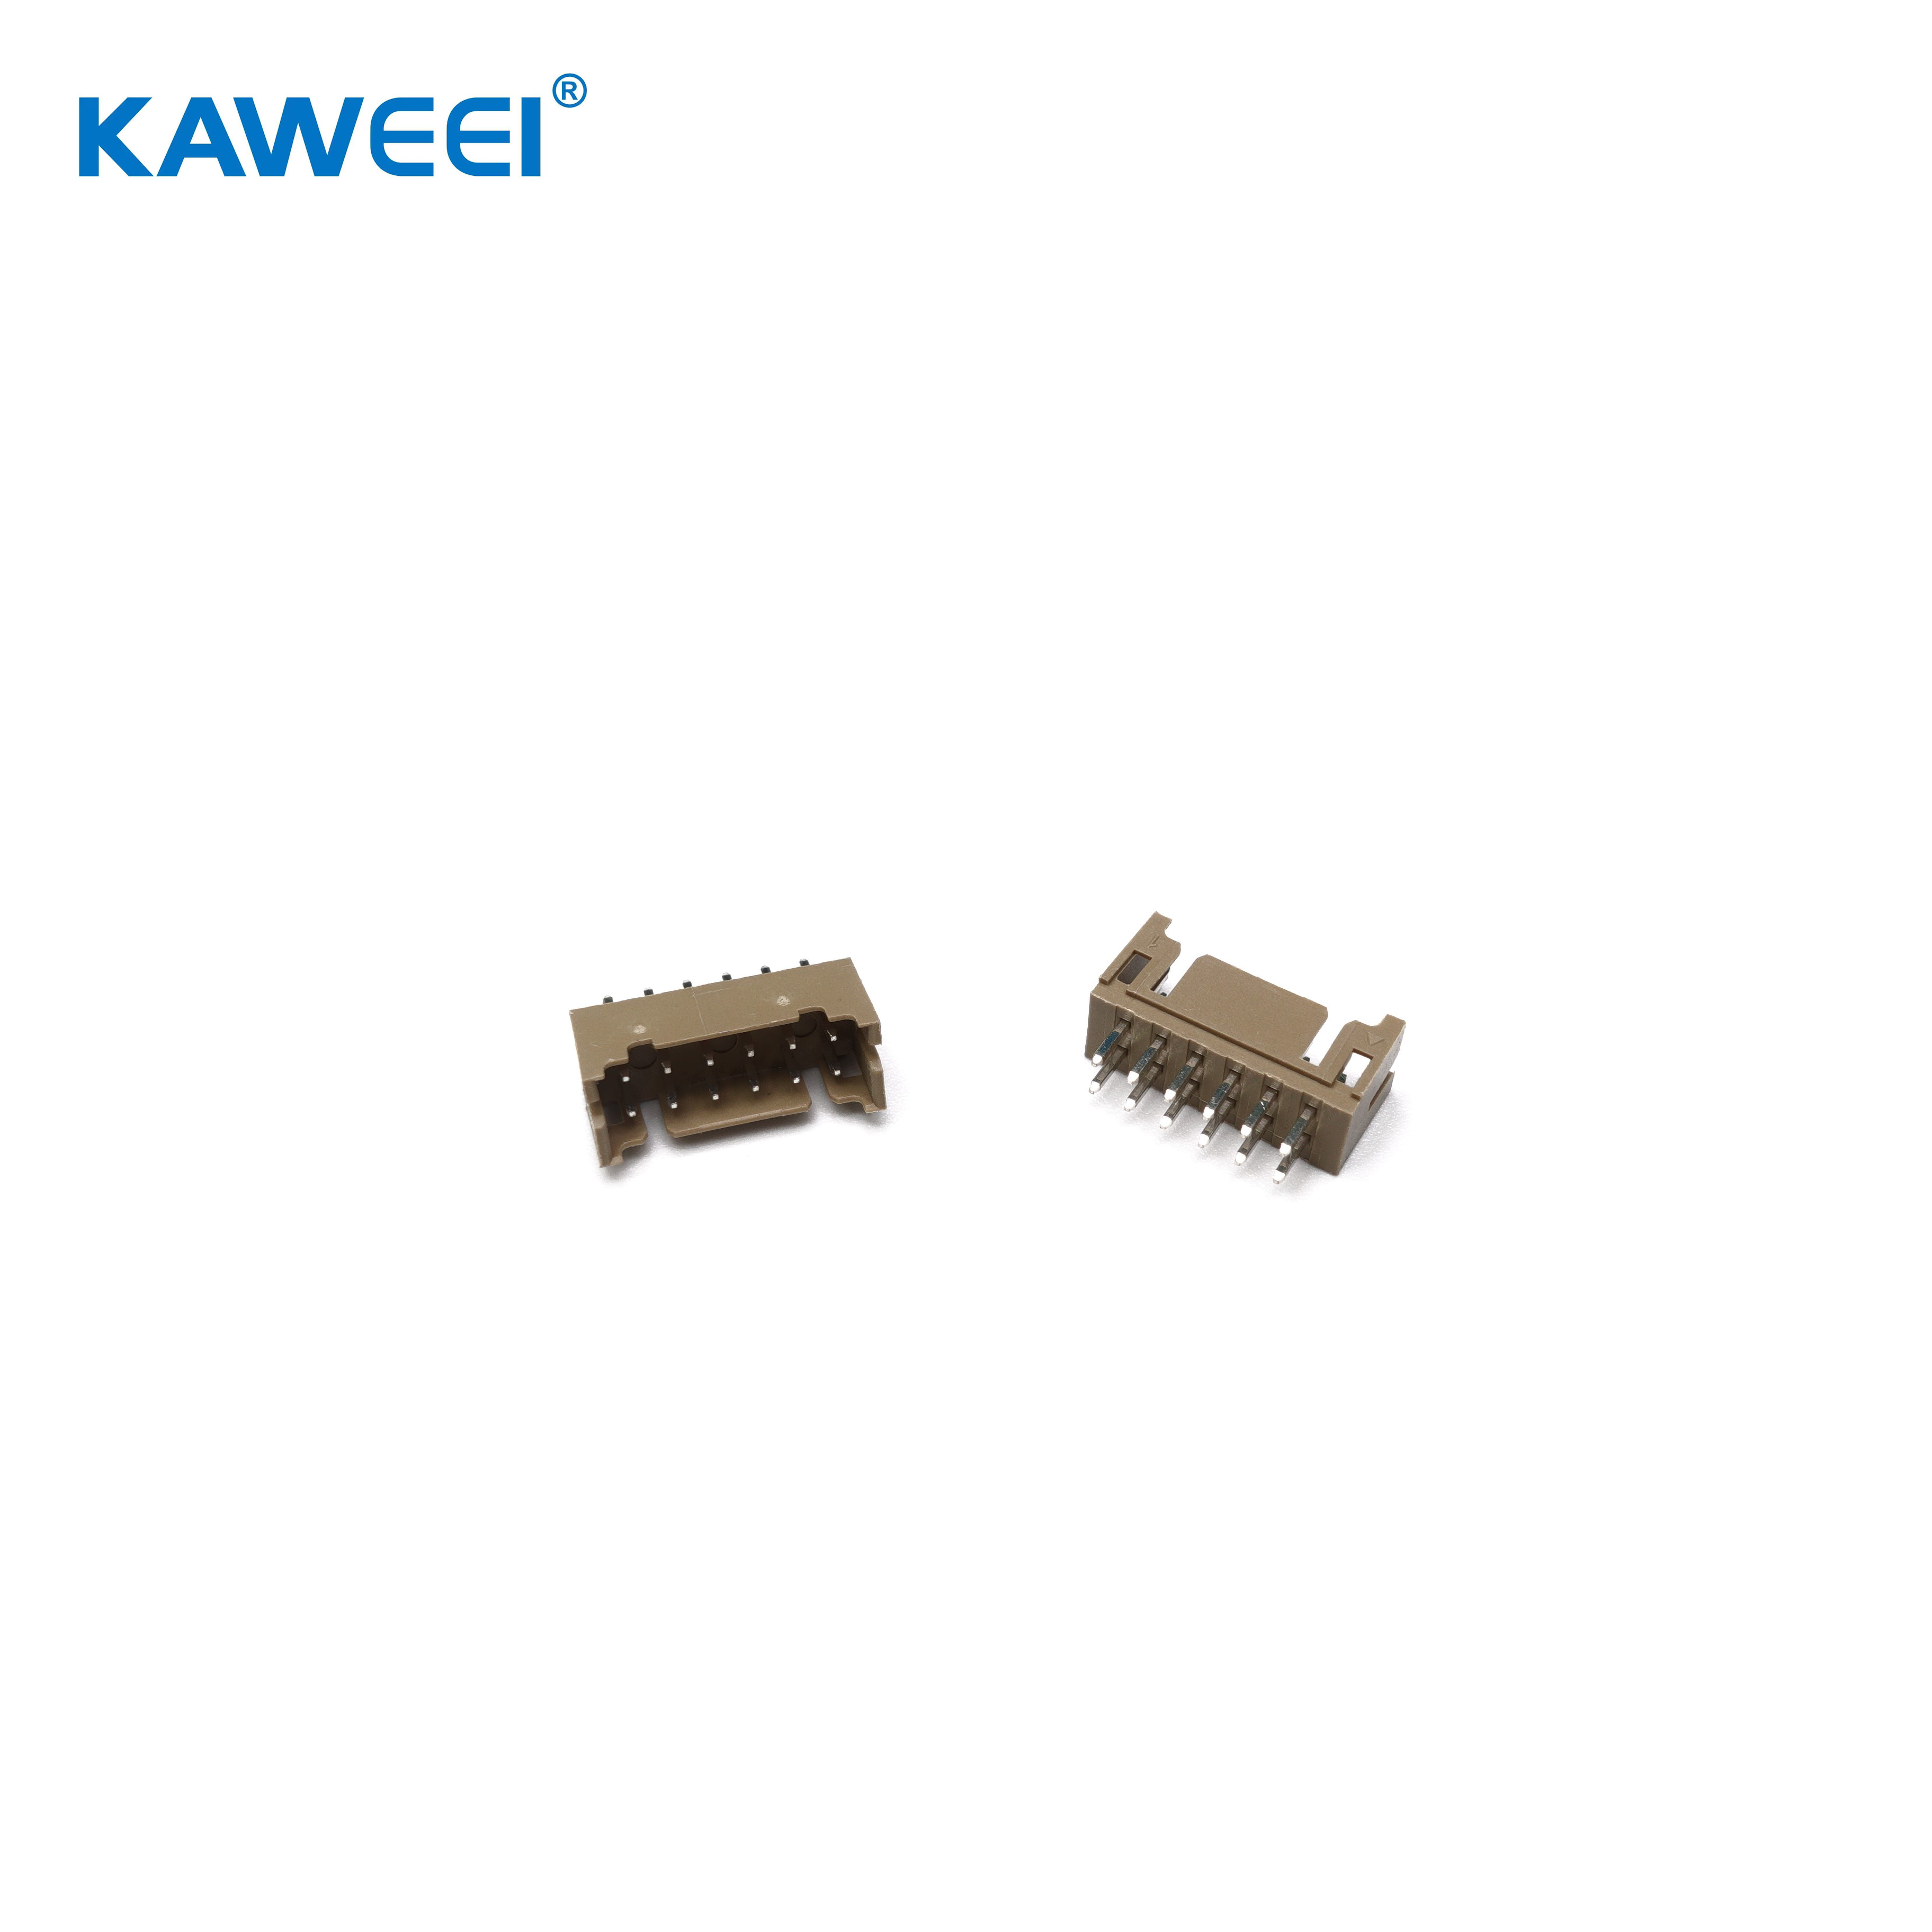 2.0mm Wafer board to board connector PCB connector